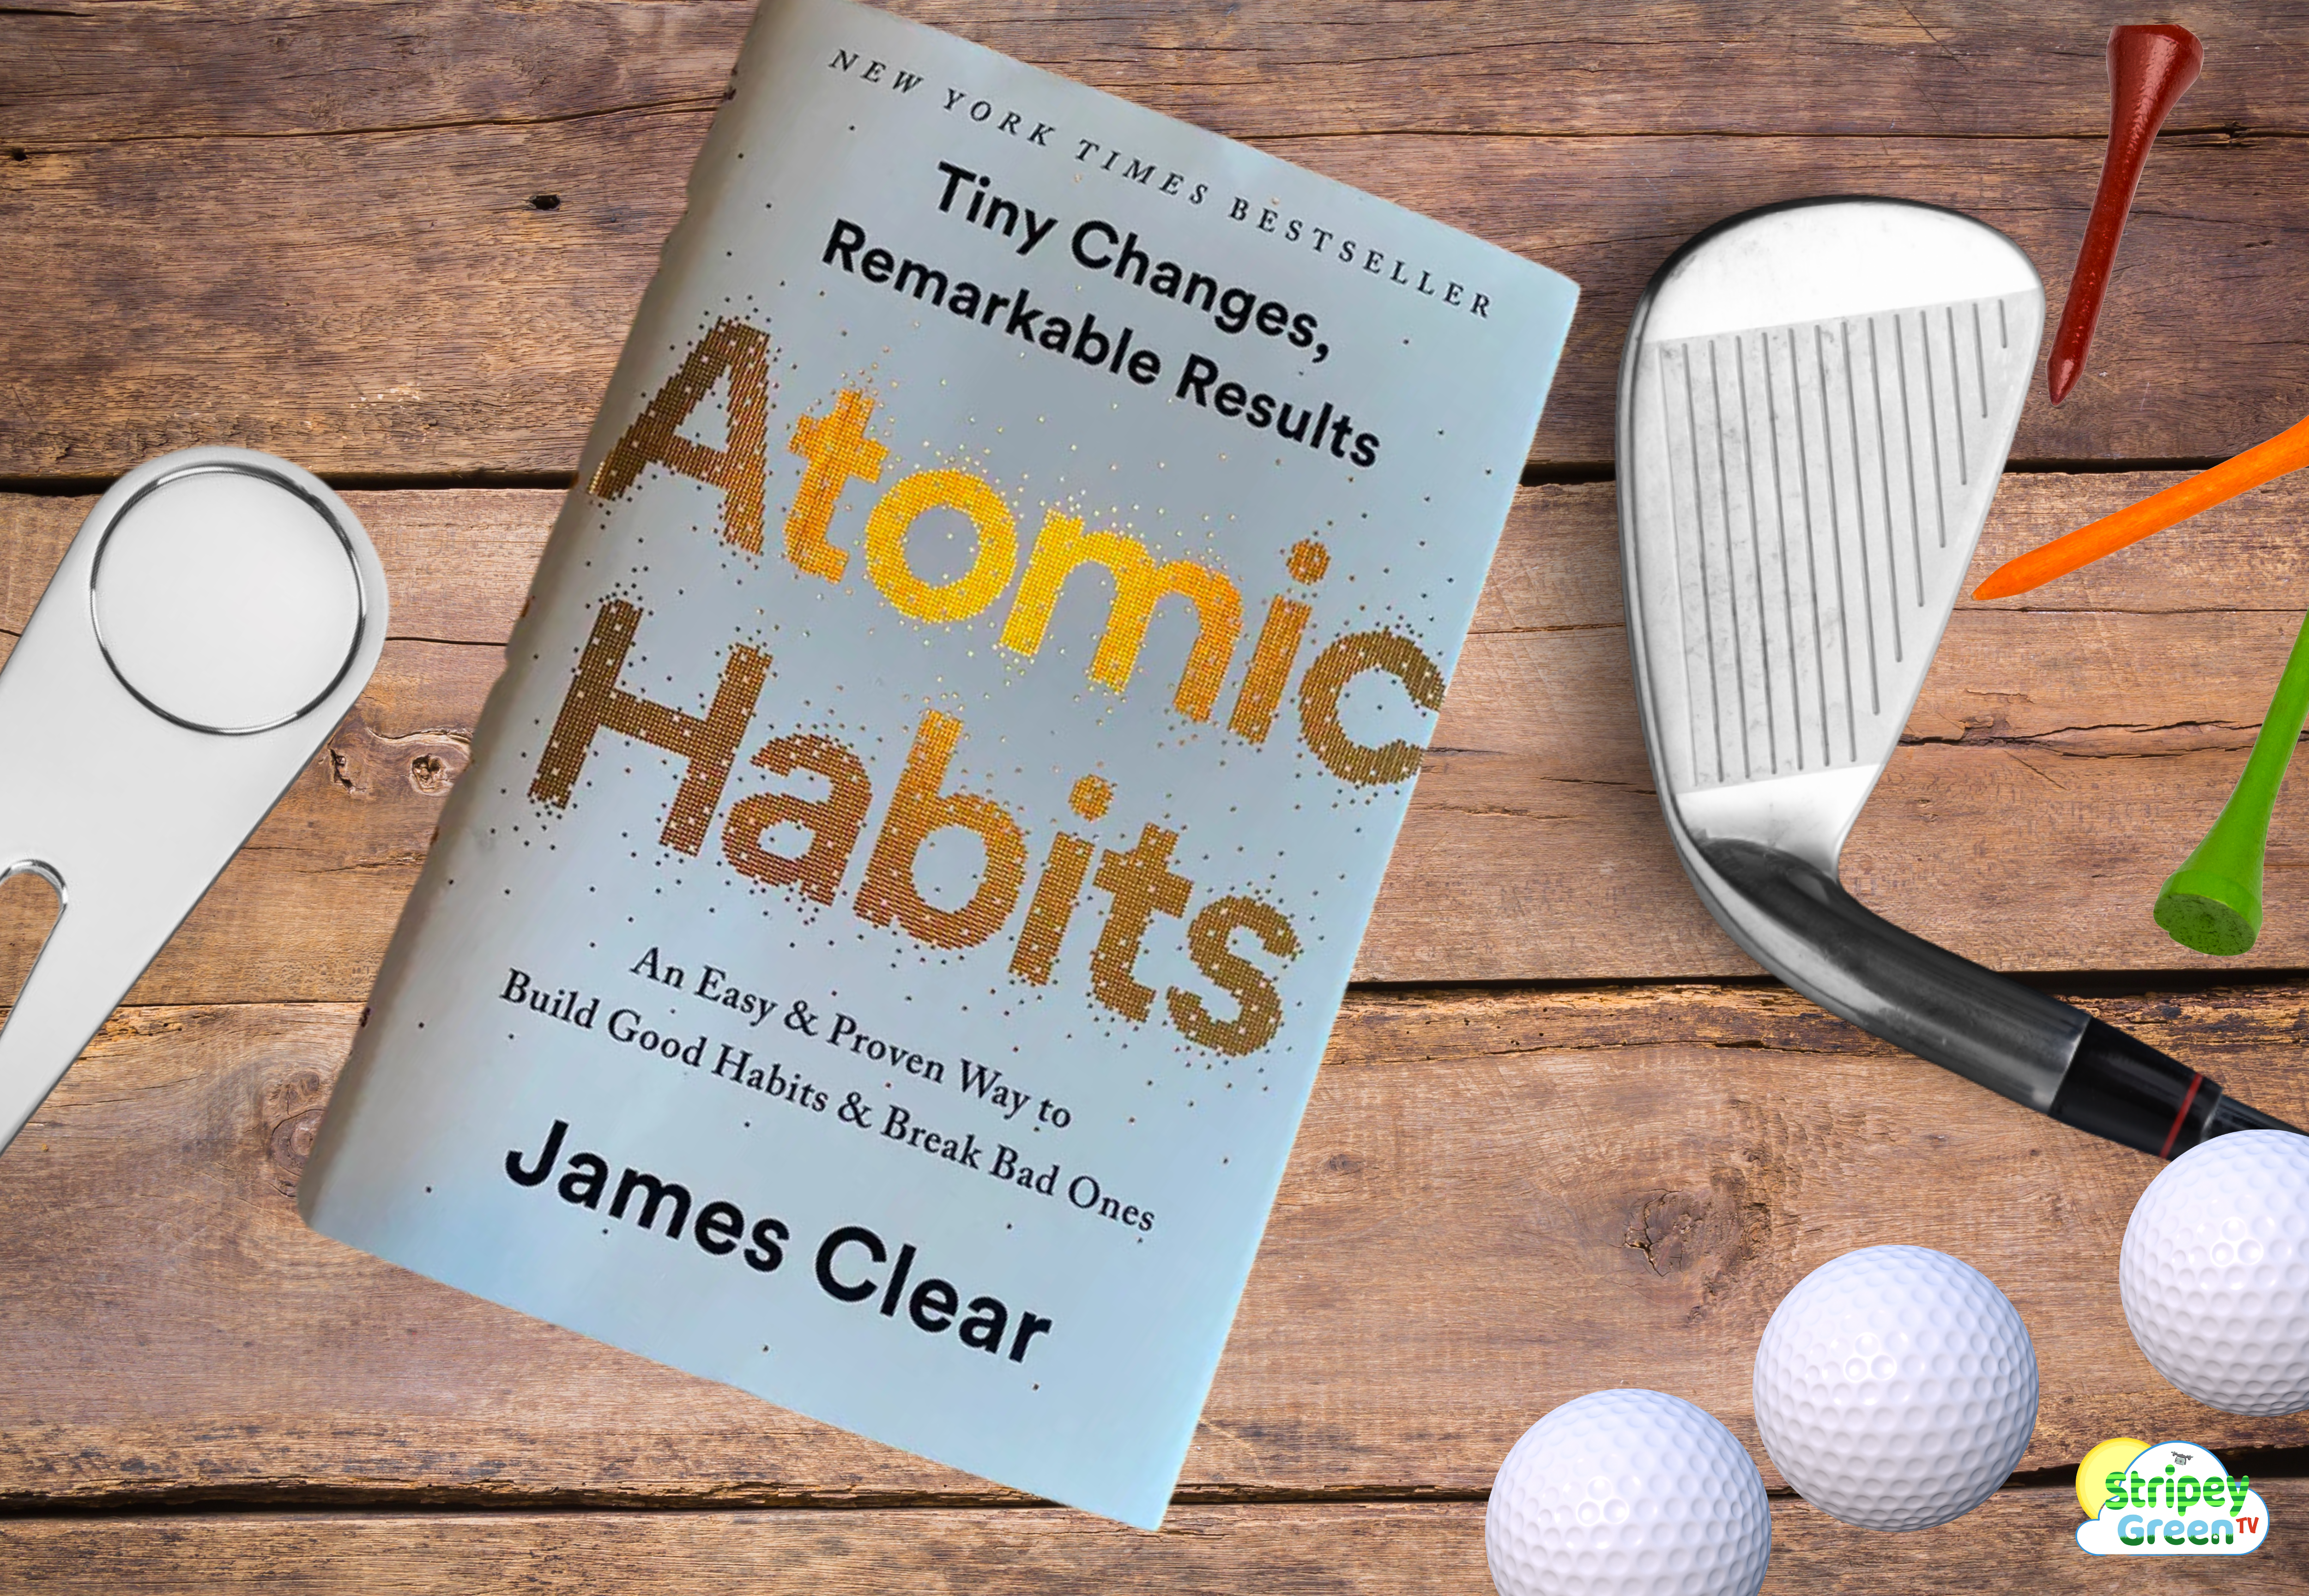 Atomic Habits by James Clear Book Review.